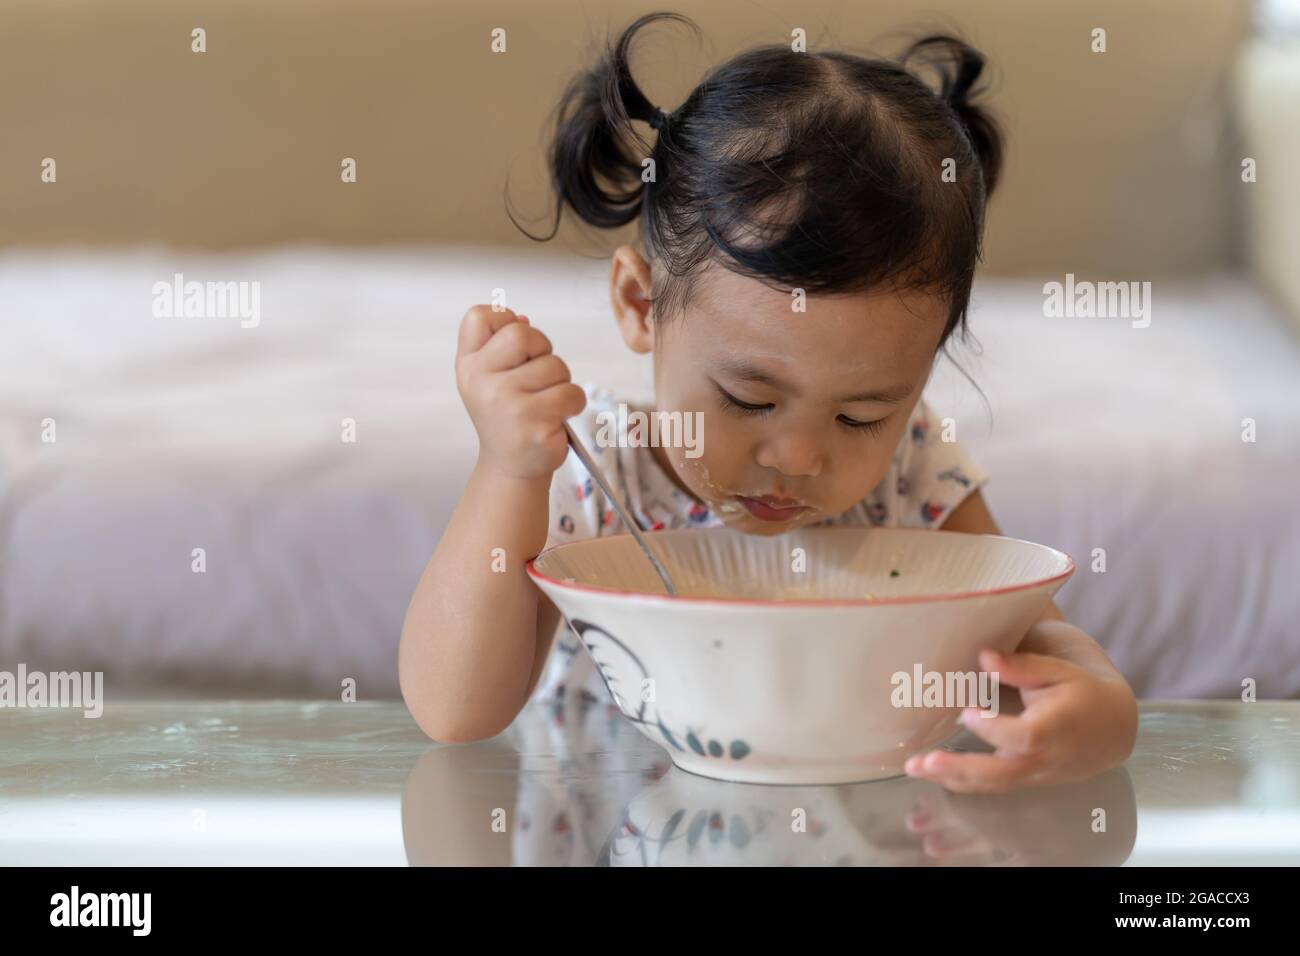 Little Thai girl eating from a big bowl Stock Photo